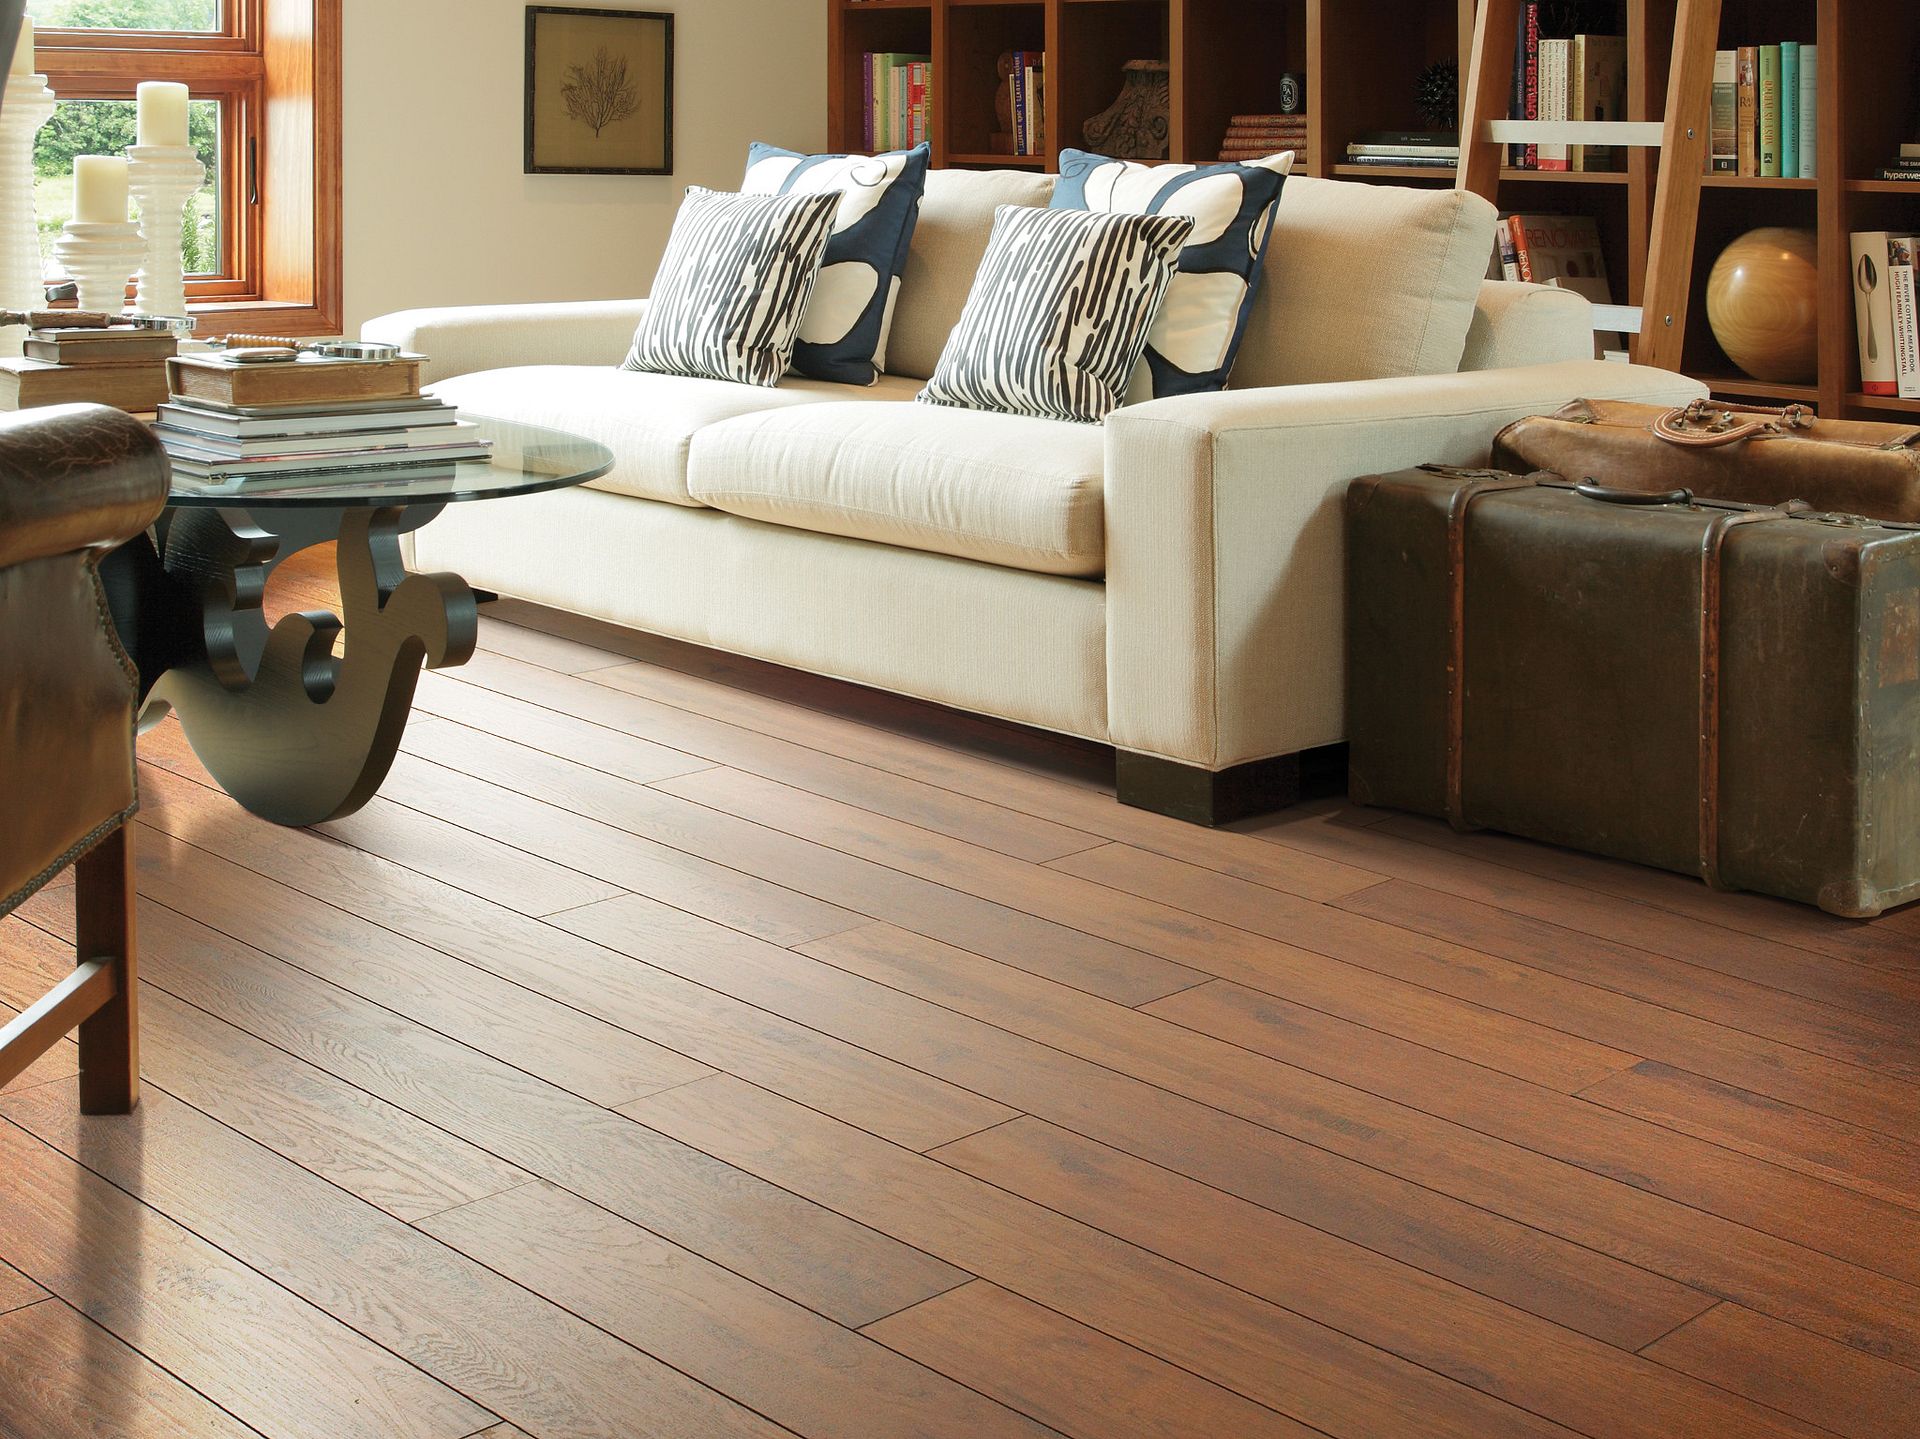 How To Clean Wood Laminate Flooring, How To Keep Furniture From Scratching Laminate Floors